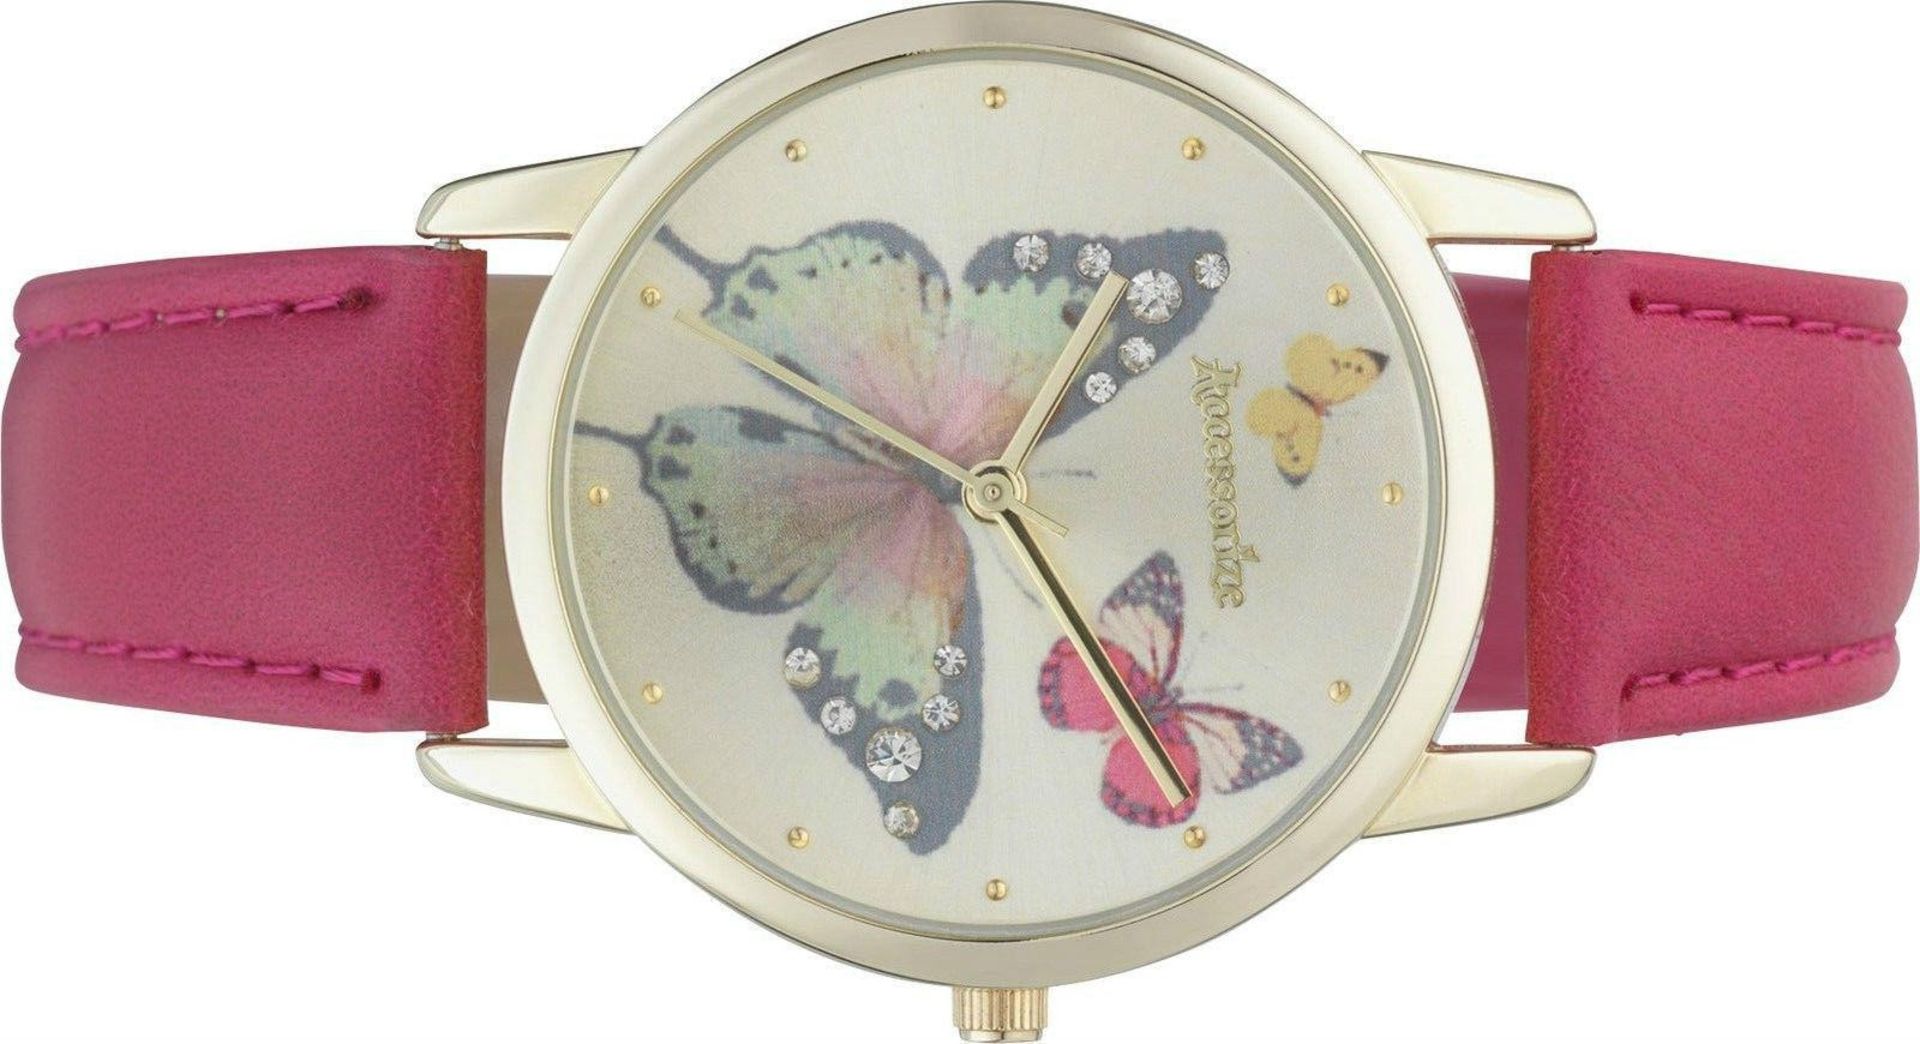 V Brand New Ladies Accessorize Butterfly Dial Watch With Leather Strap - RRP £17.50